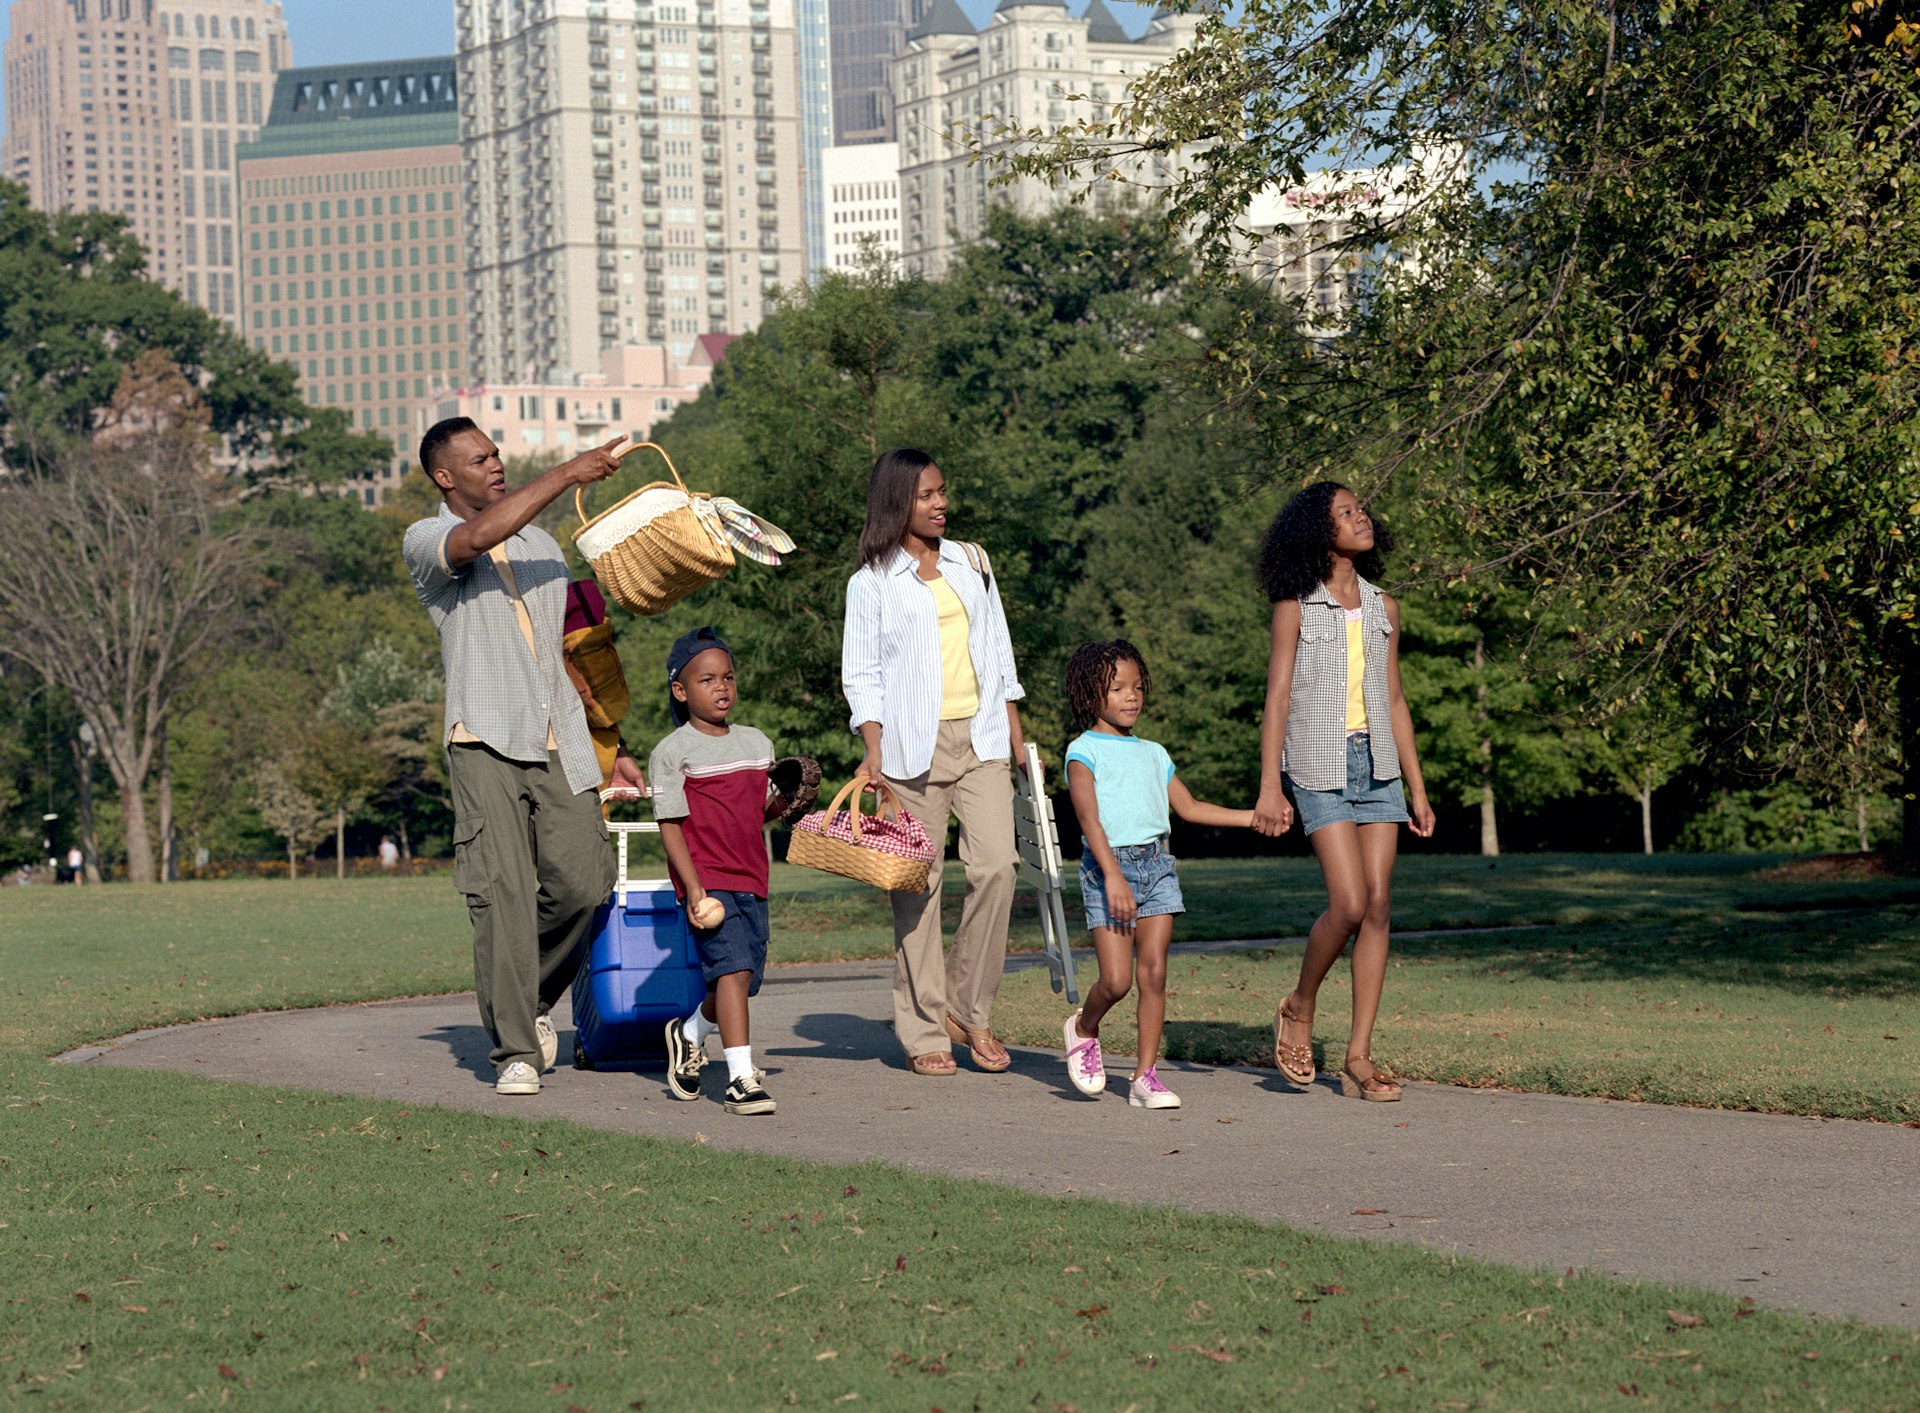 Parents and children enter Piedmont Park with picnic gear on a sunny day.